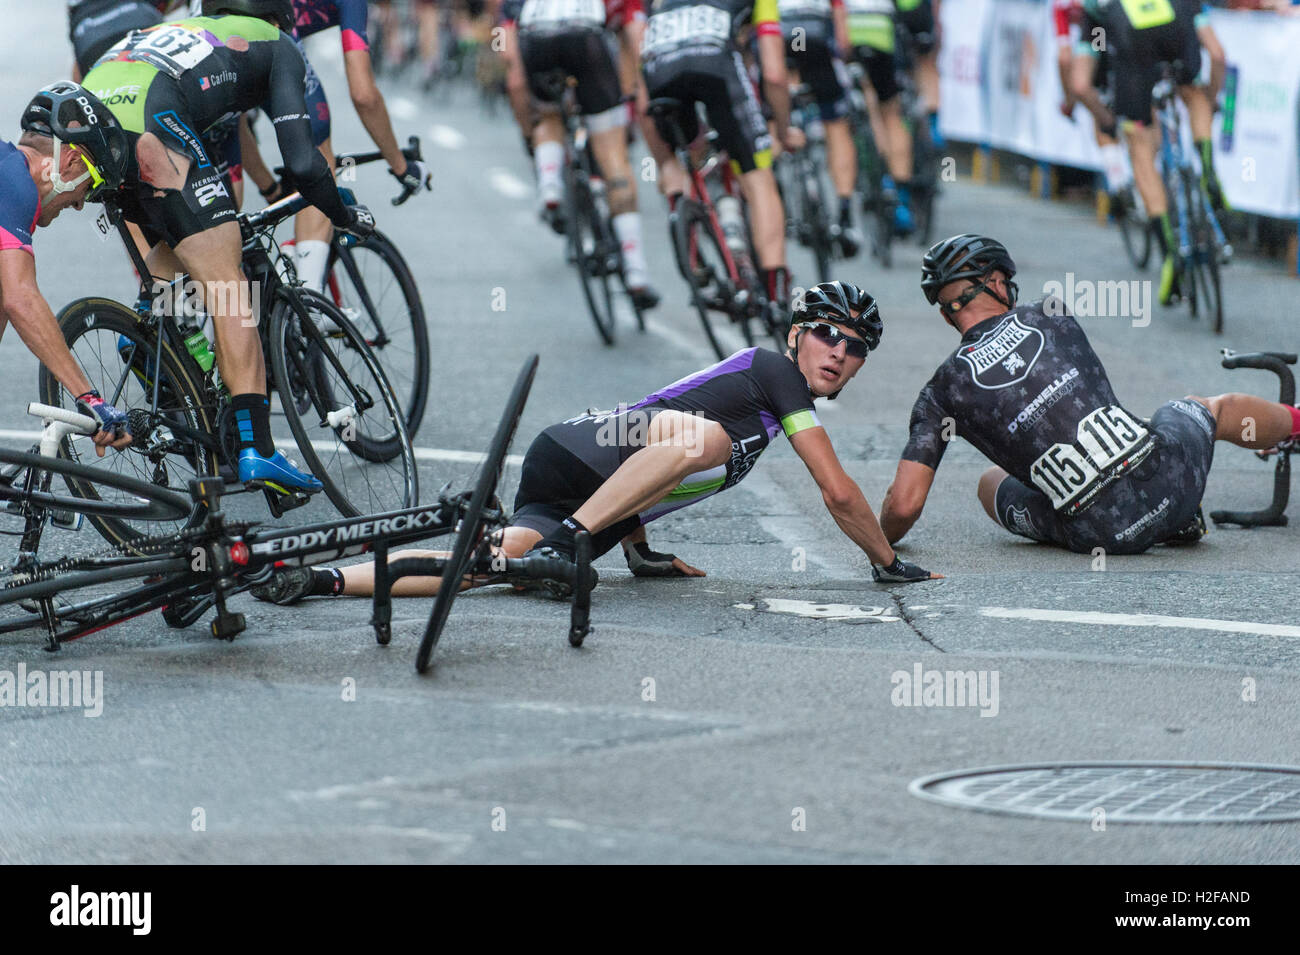 Gastown Prix road cycling race accident, Vancouver British Columbia. Stock Photo